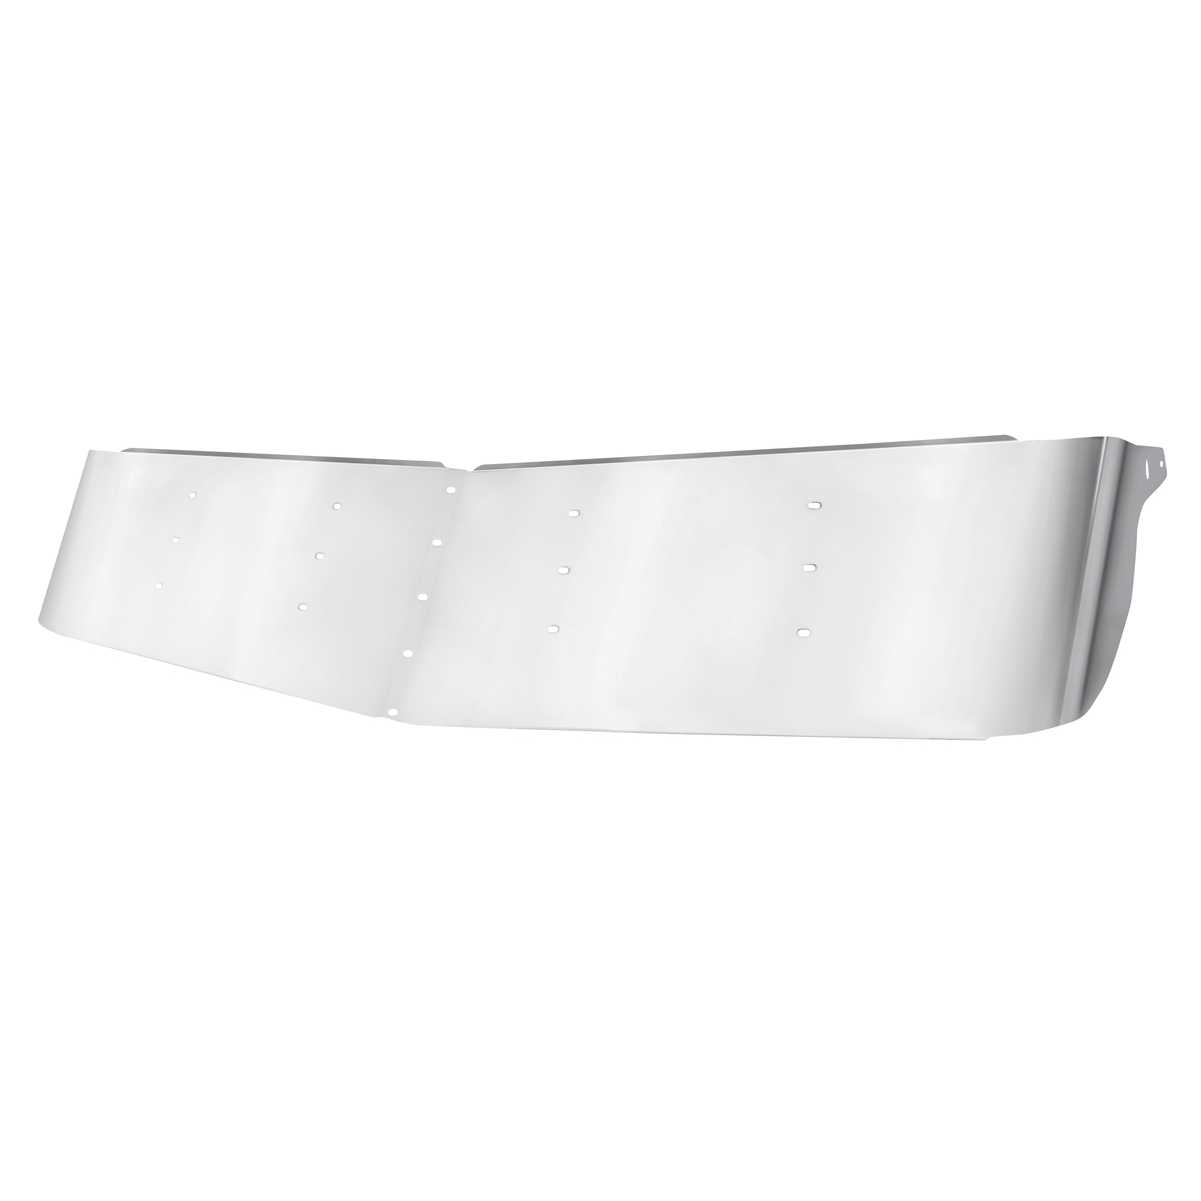 13.5 Inch Drop Sun Visor for Kenworth W900L, W900B, T800 with Curved Windshield